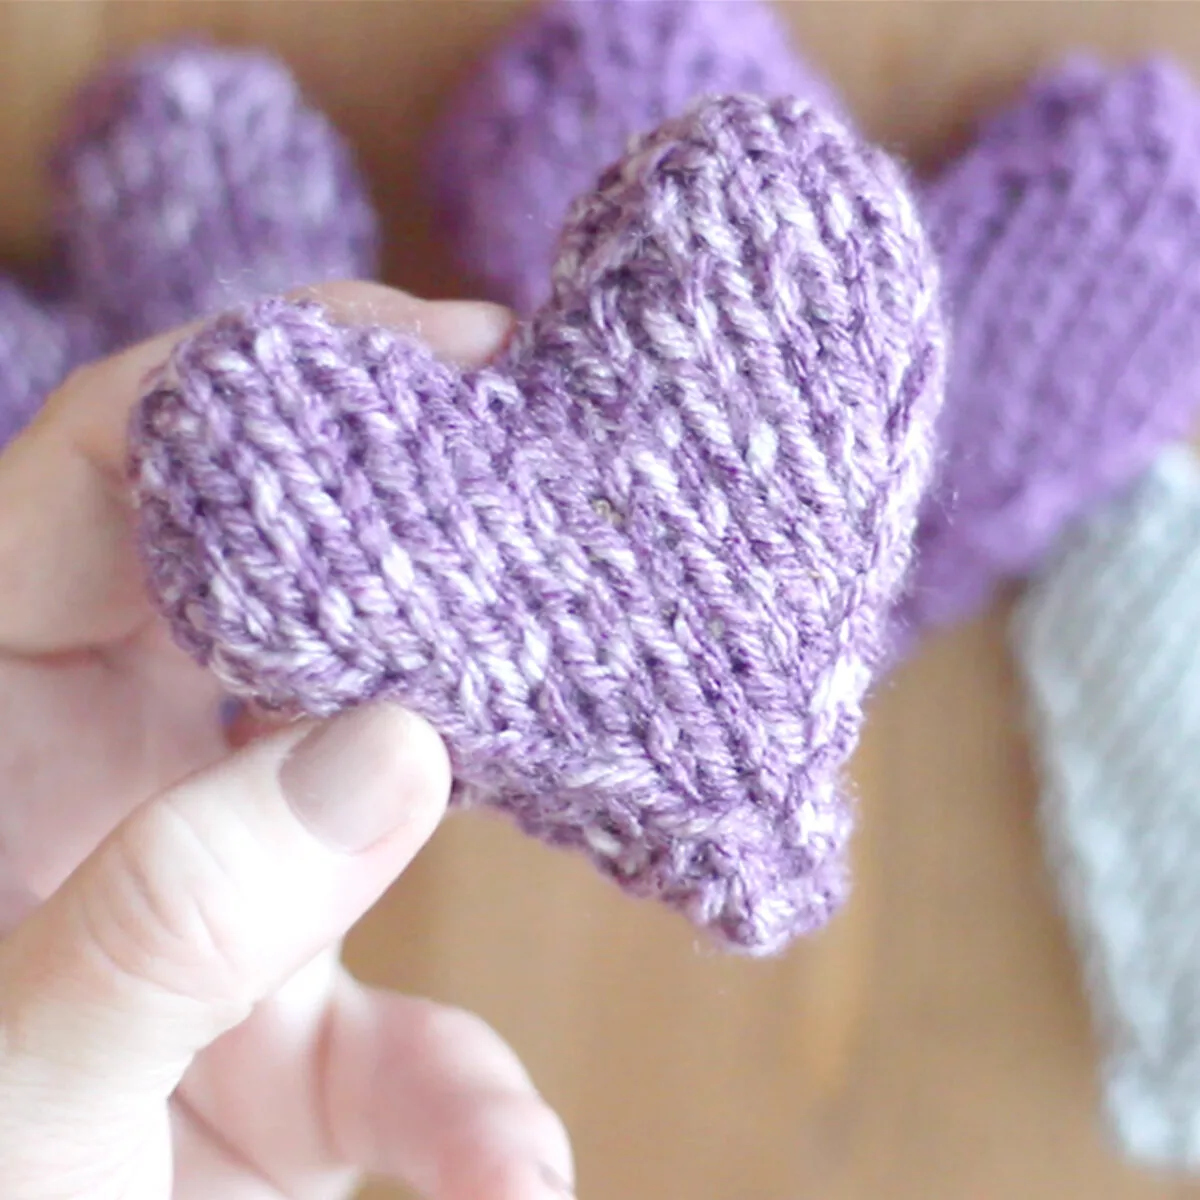 puffy stuffed knitted heart with hand holding